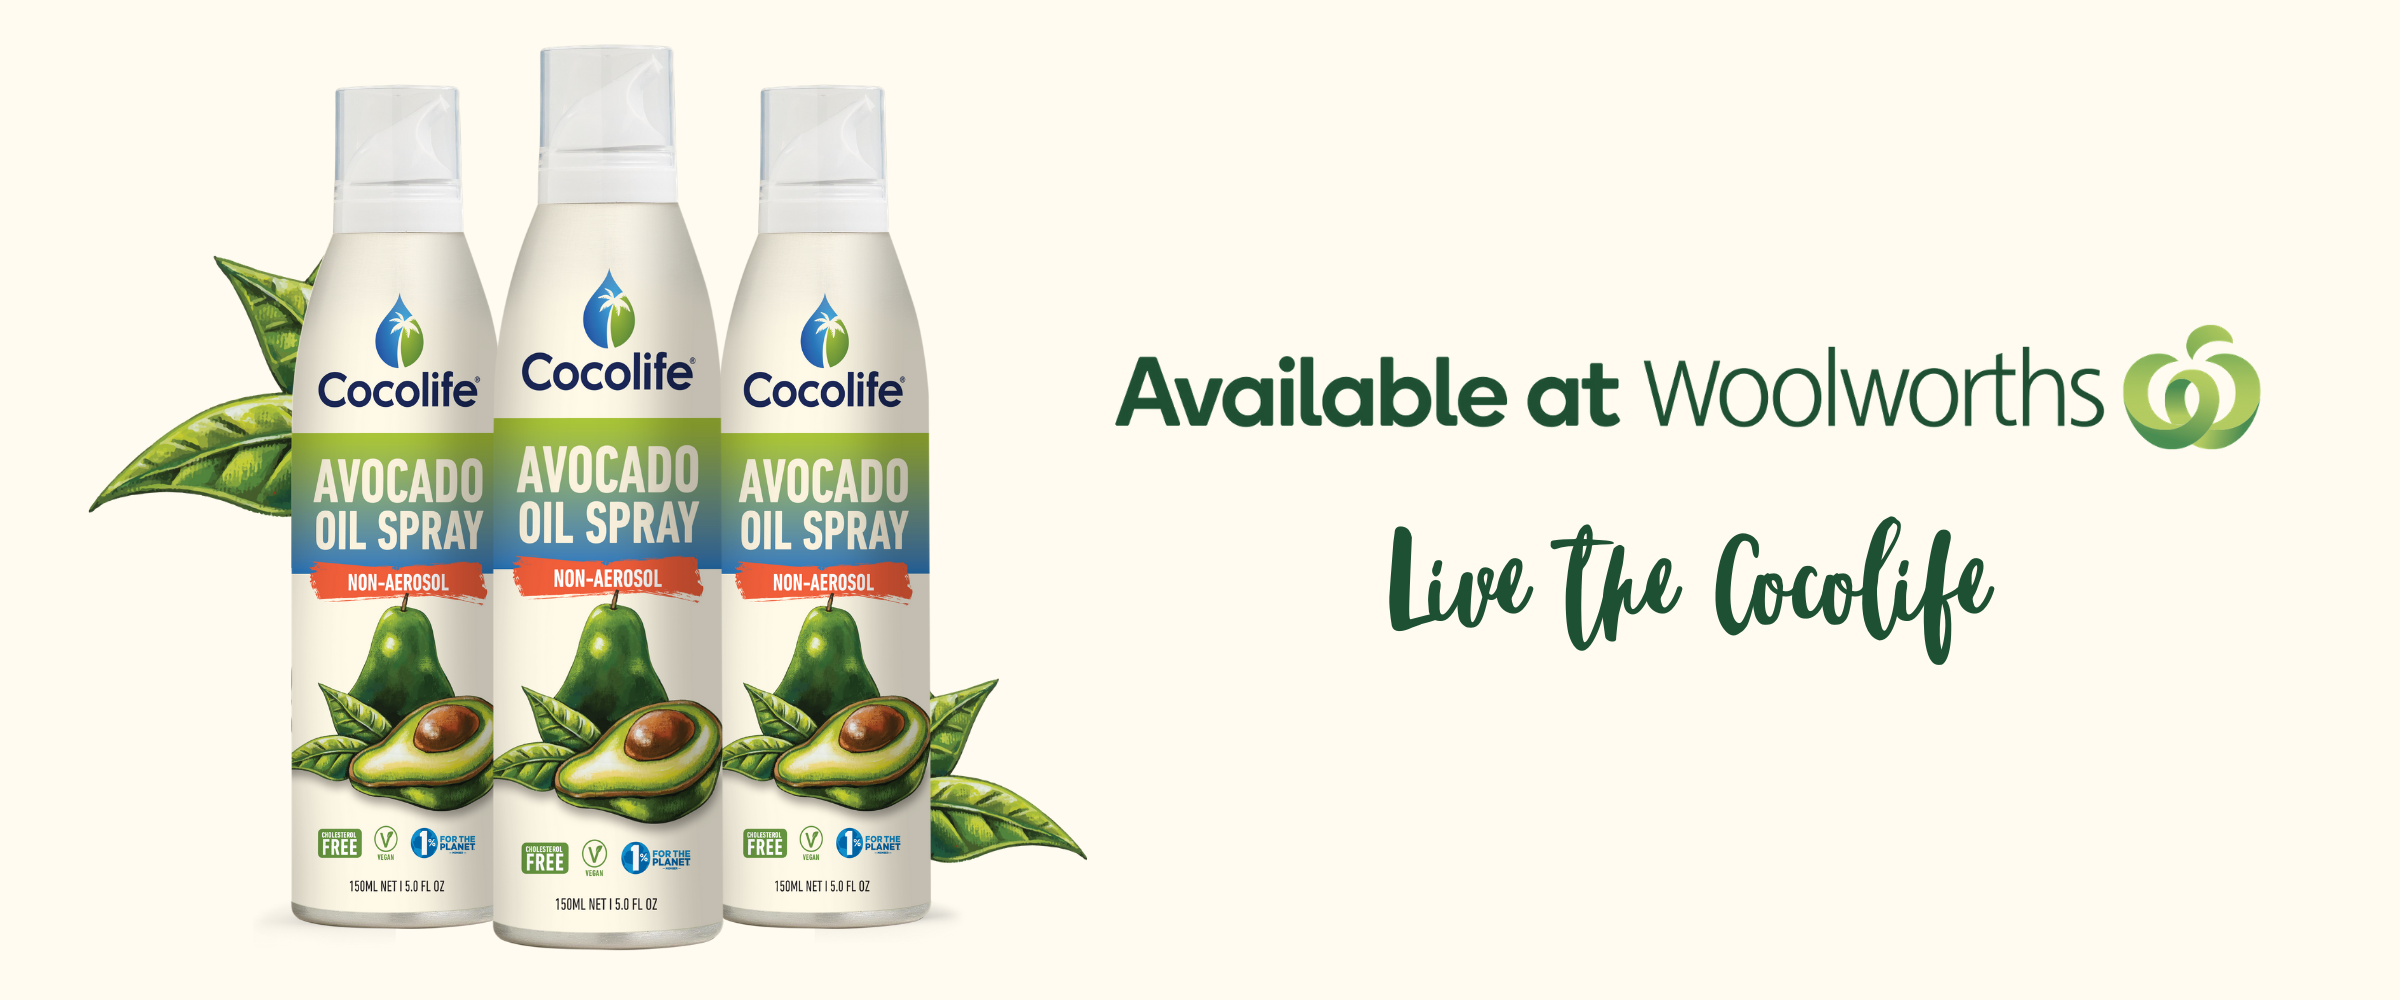 Avocado Oil Spray by Cocolife - Available at Woolworths